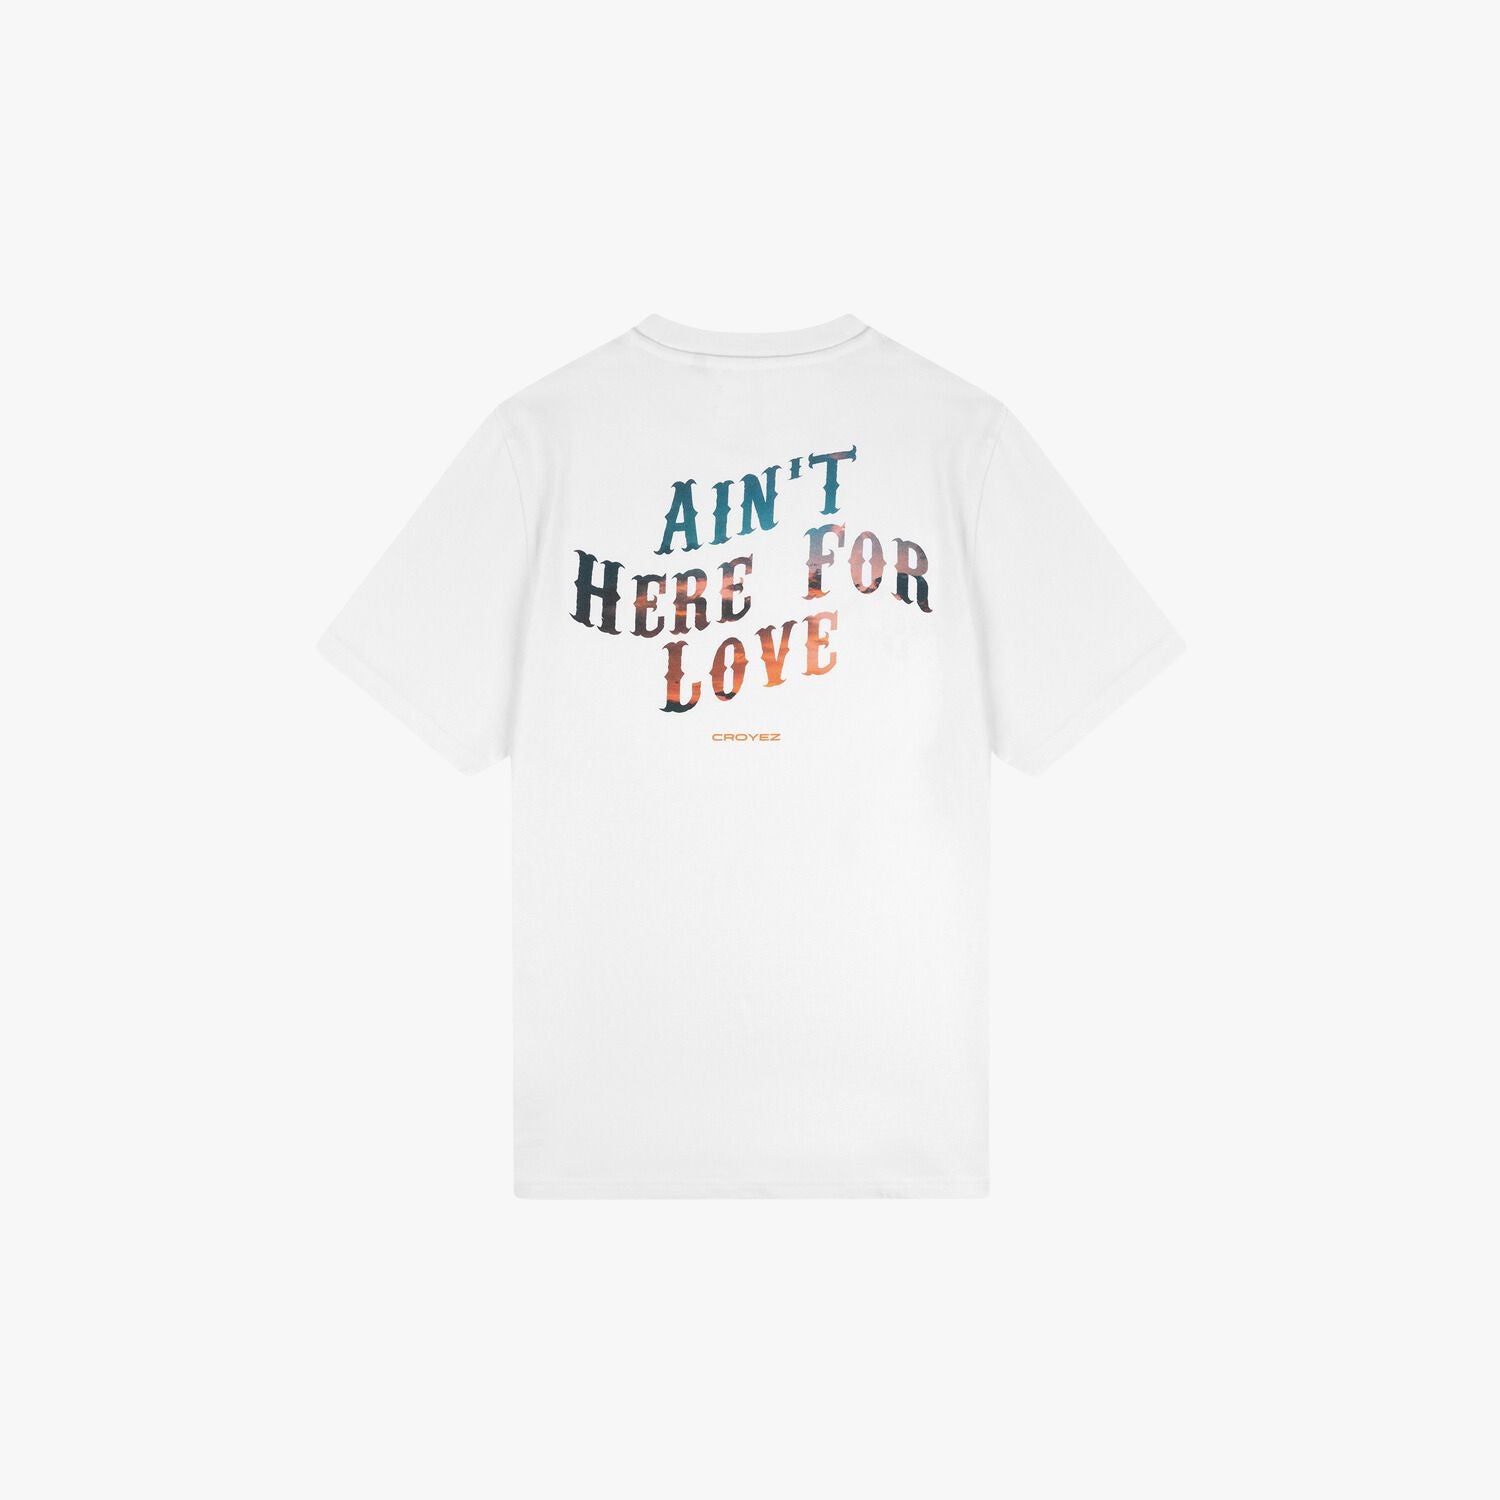 CROYEZ AINT HERE FOR LOVE T-SHIRT - WHITE